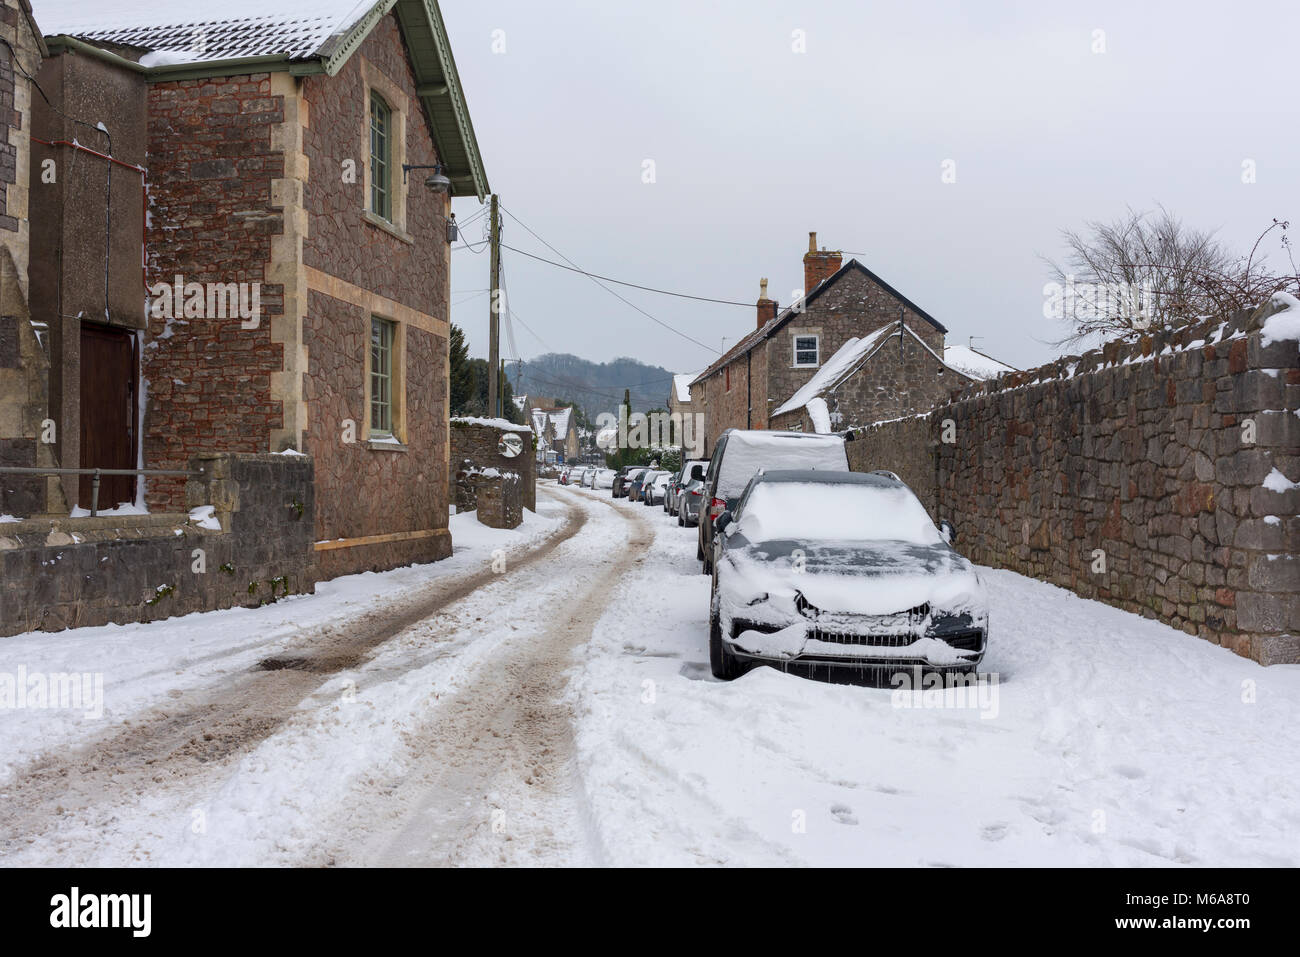 A street covered in snow in the rural village of Wrington, North Somerset, England. Stock Photo